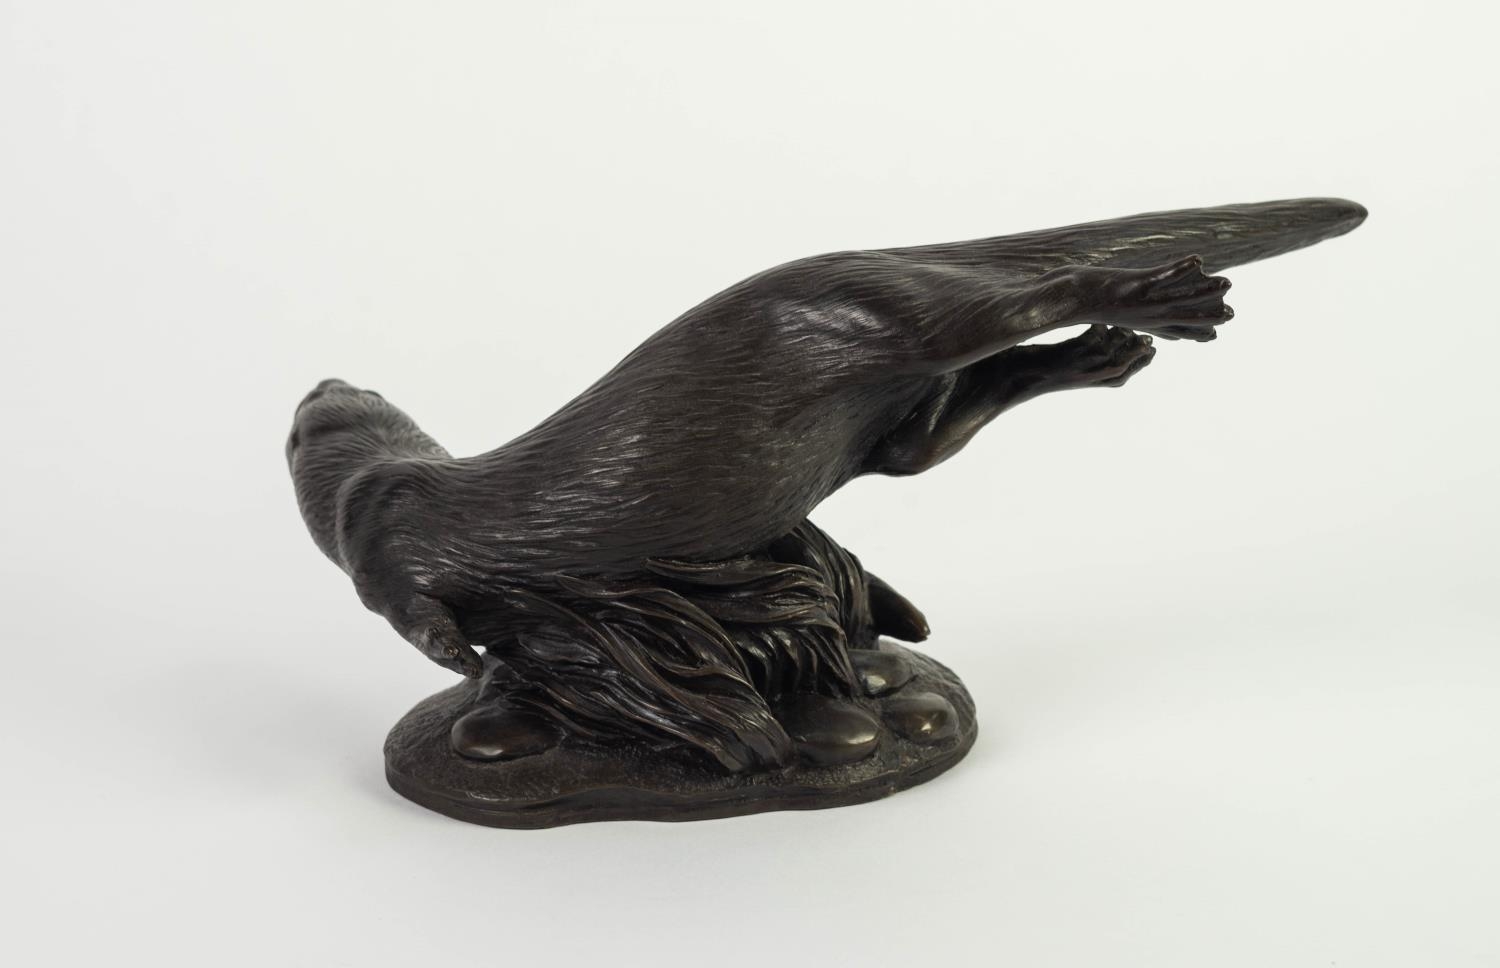 TOM MACKIE FOR HEREDITIES BRONZED RESIN SCULPTURE Modelled as an otter swimming Incised signature to - Image 2 of 3